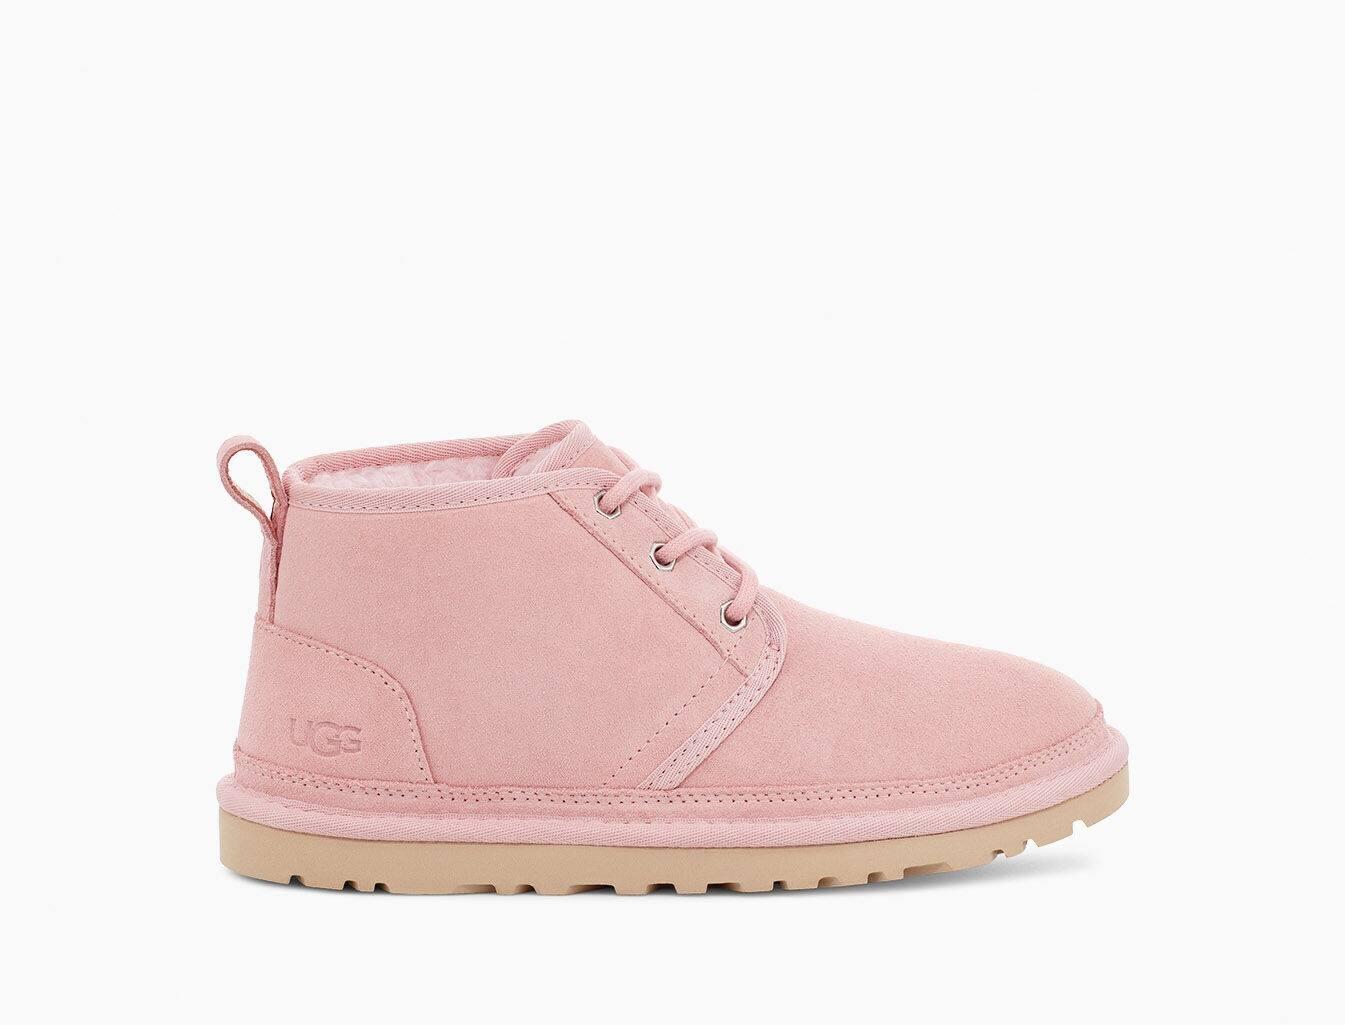 UGG Wool Neumel Boot in Pink Cloud (Pink) - Lyst